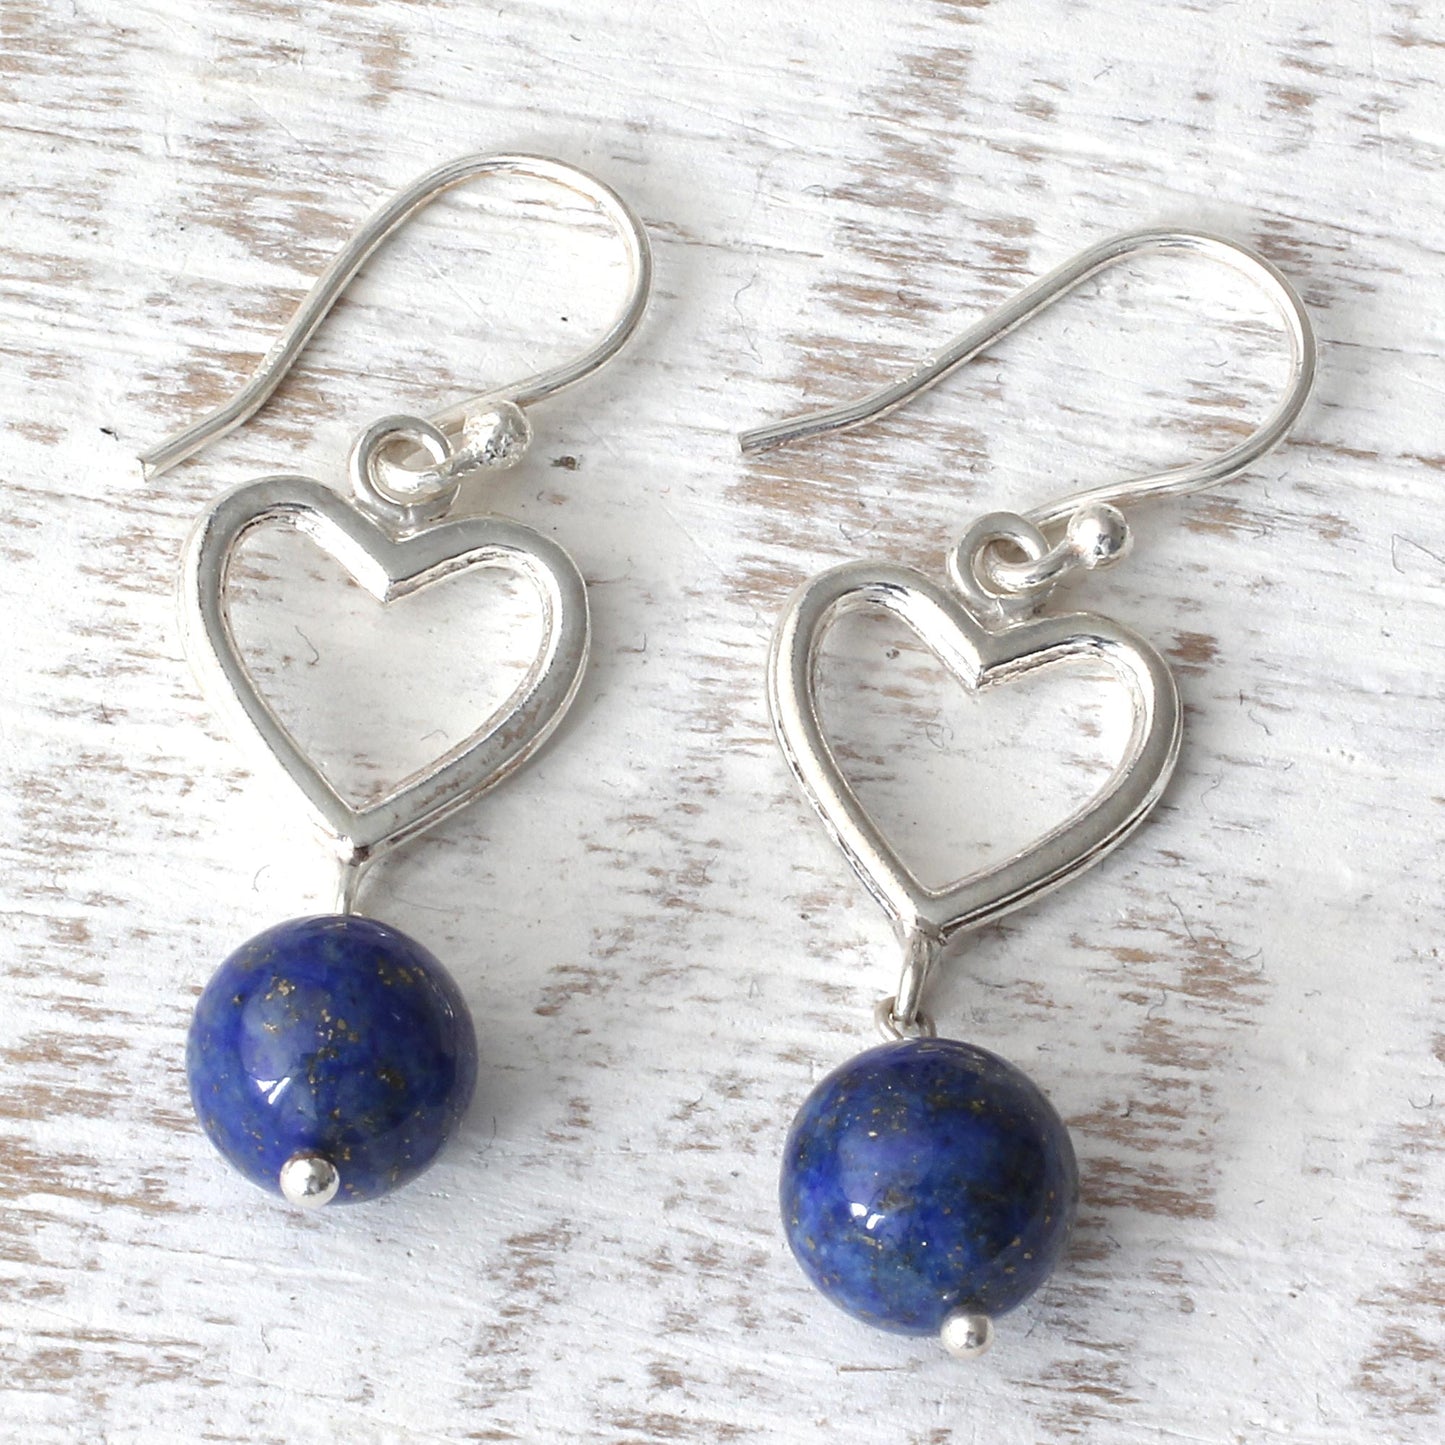 Majestic Globes Handcrafted Lapis Lazuli and Sterling Silver Dangle Earrings